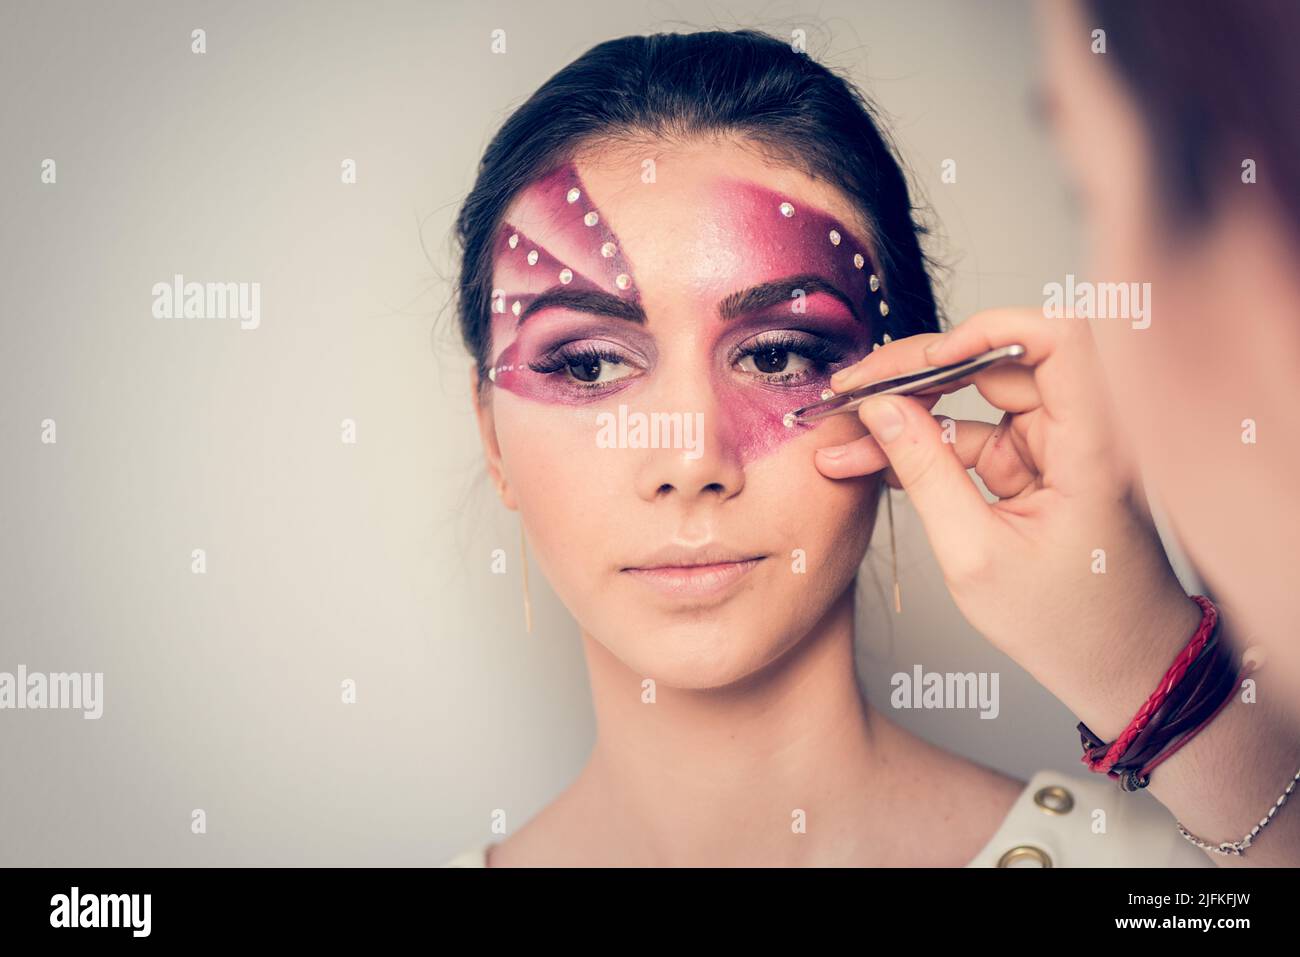 After painting her face with purple, the make-up artist is applying  crystals on young famale model's face with tweezers Stock Photo